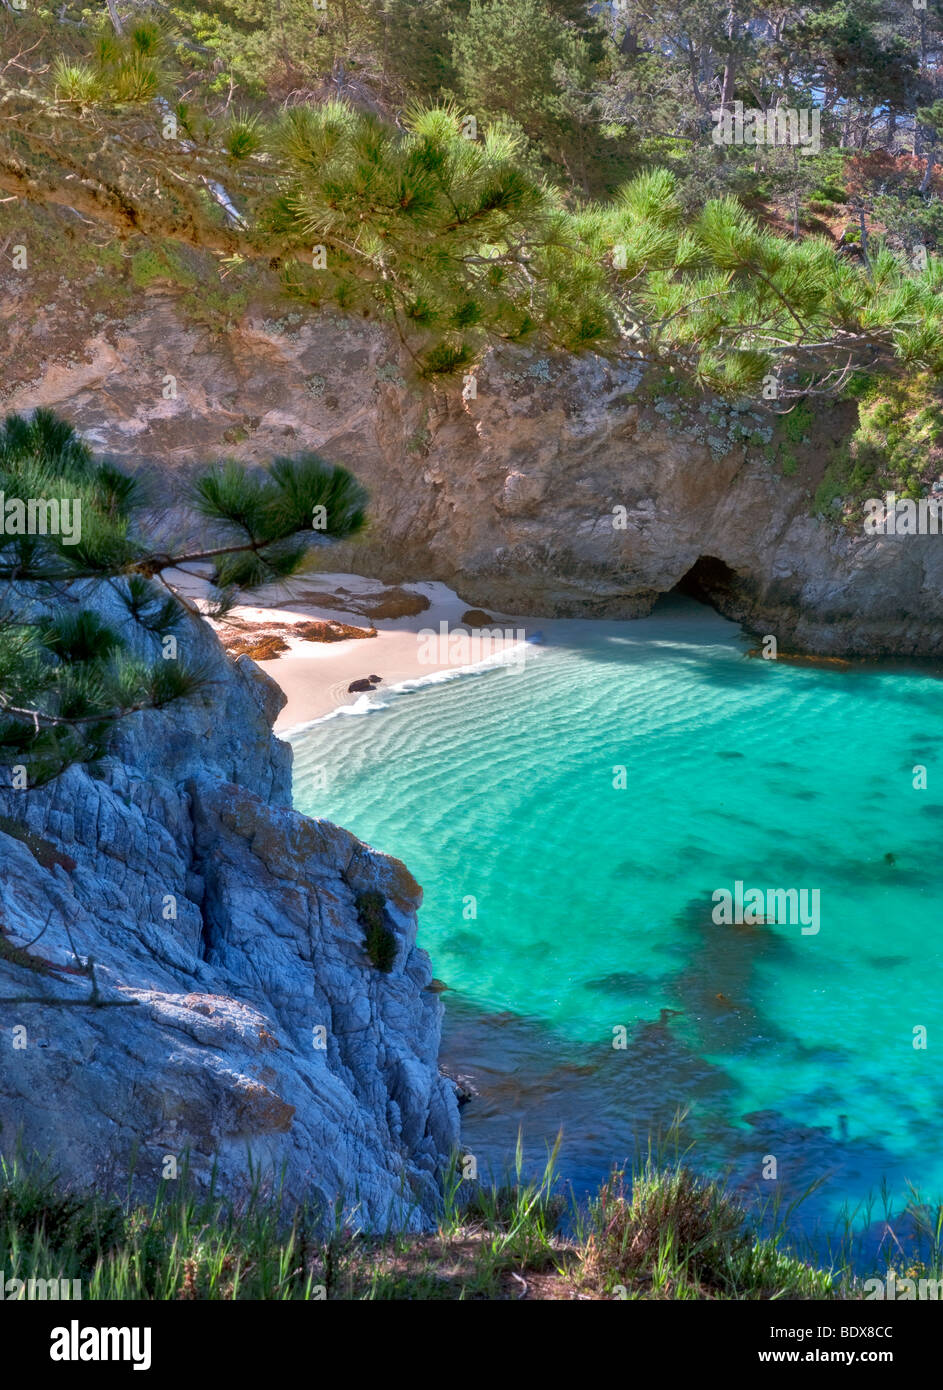 China beach with California Harbor Seals on beach. Point Lobos State Reserve, California Stock Photo